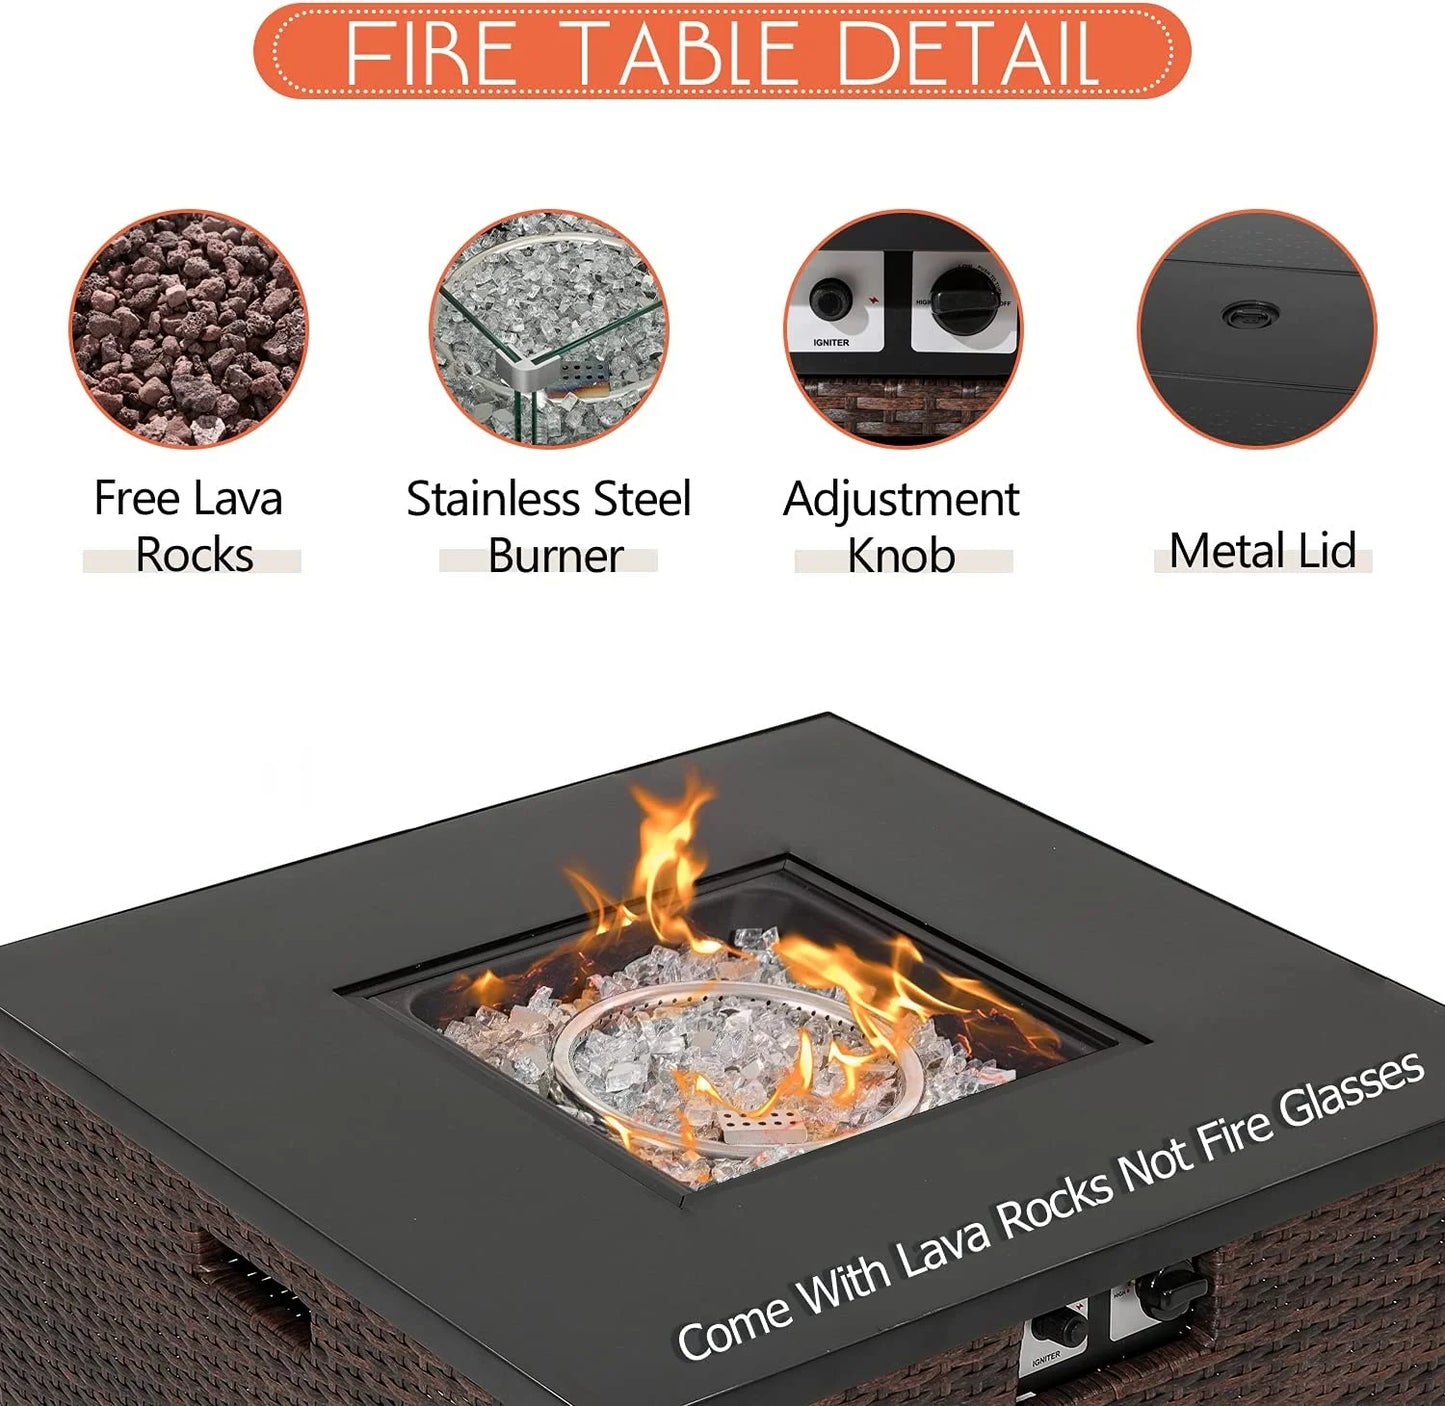 ZFGSUIJN Propane Patio Fire Pit Table  Lava Rocks and Rain Cover for Outdoor Leisure Party 40 000 BTU  Tank Outside  32-inch Square Dark Brown Wicker Fire Table